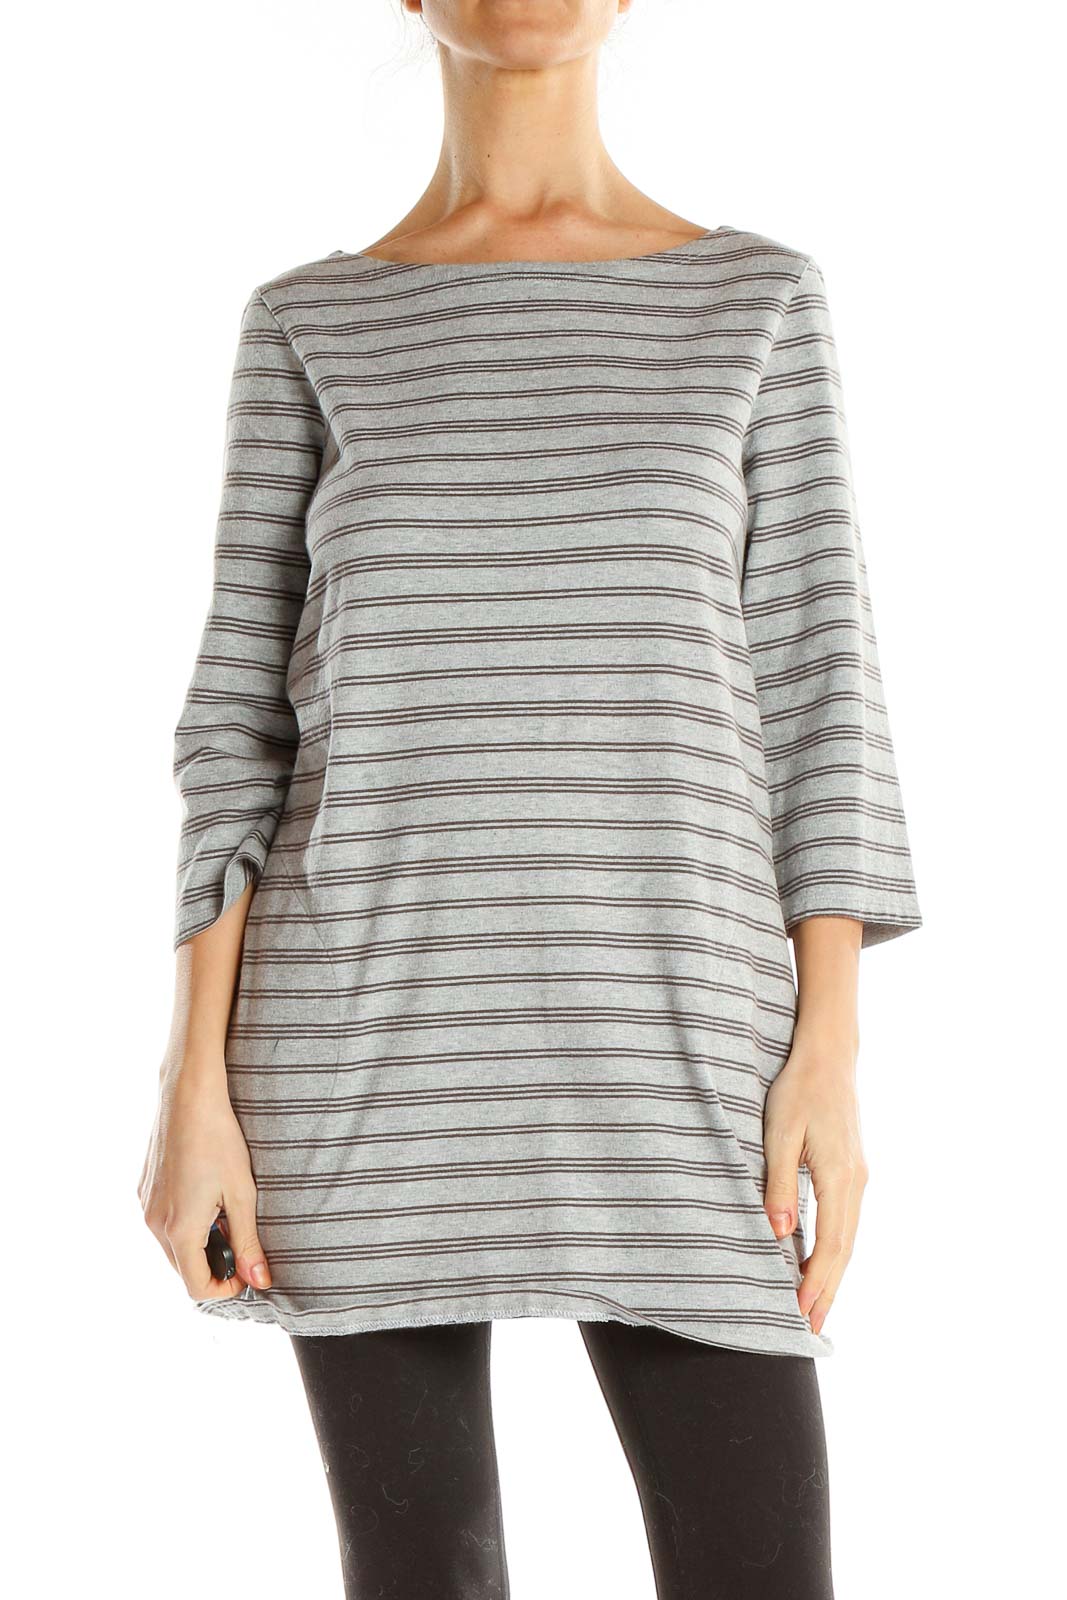 Gray Striped All Day Wear Top Front